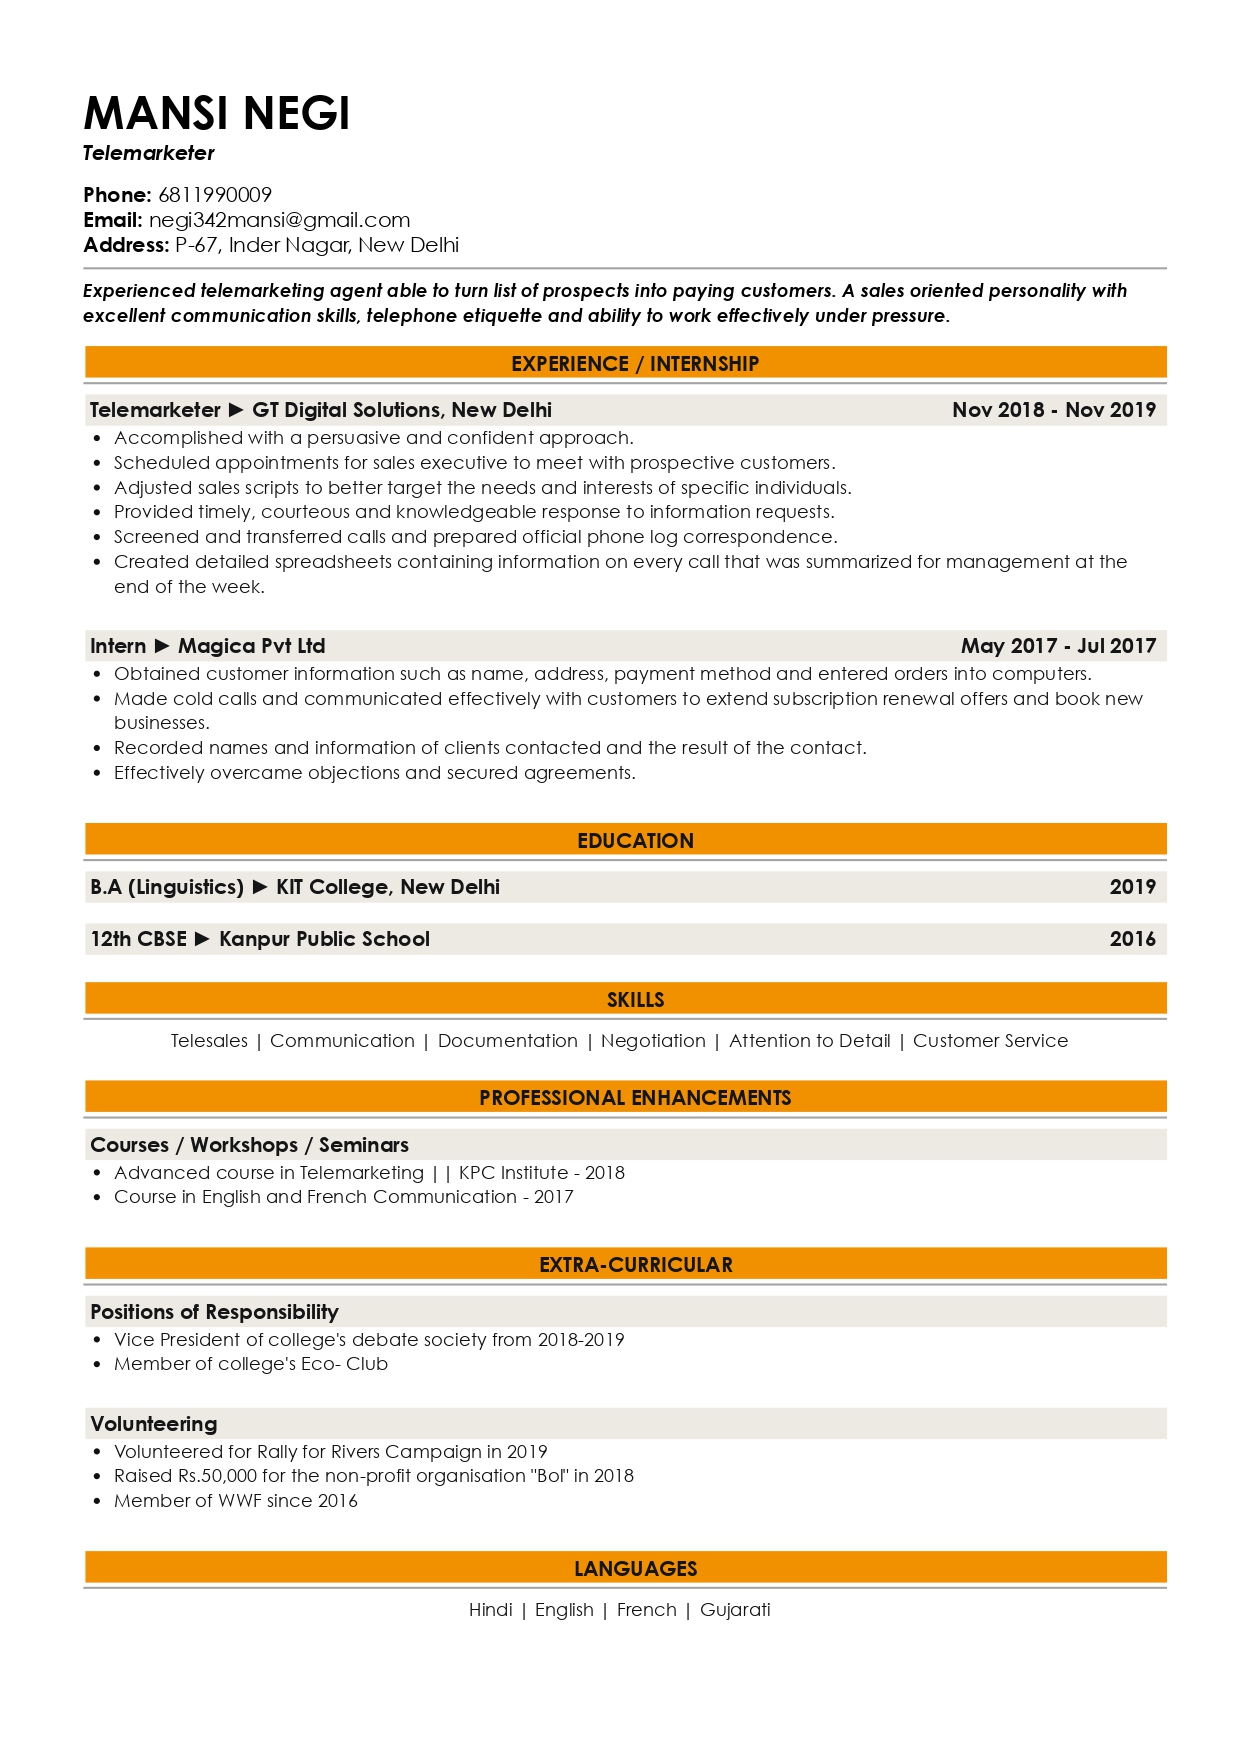 Sample Resume of Telemarketer | Free Resume Templates & Samples on Resumod.co